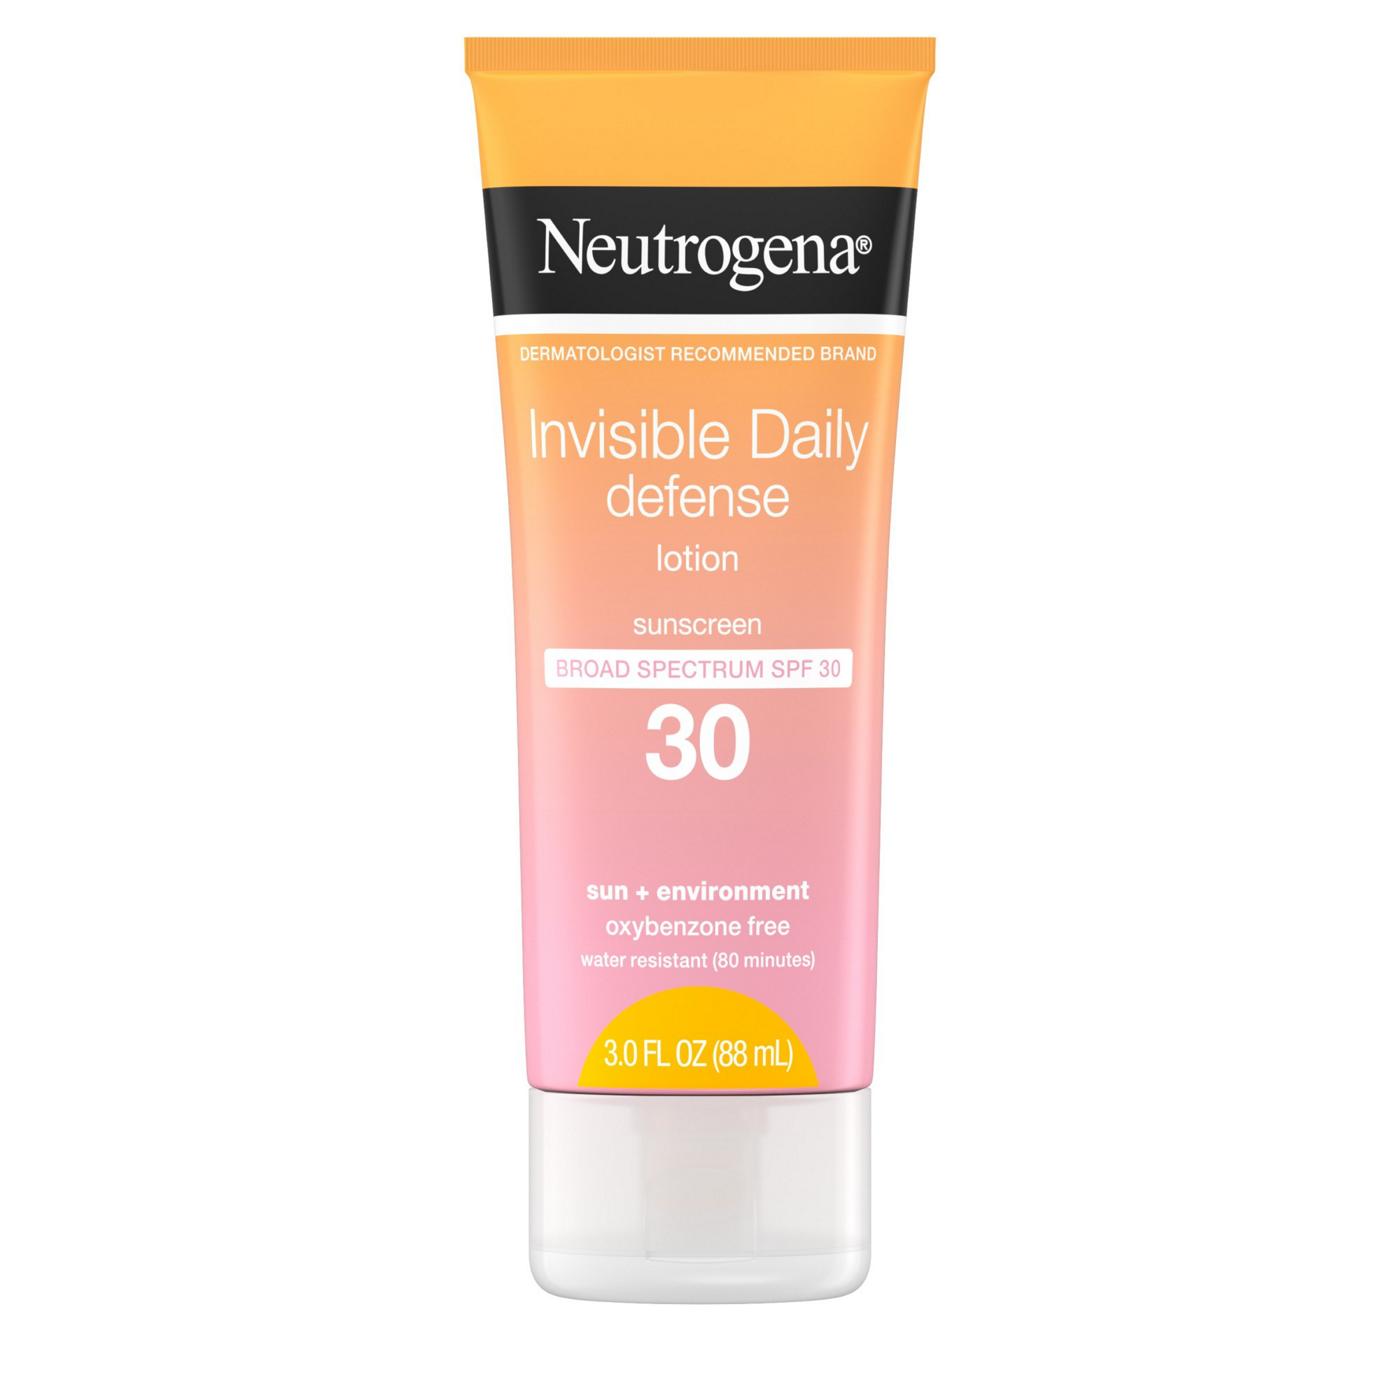 Neutrogena Invisible Daily Defense Sunscreen Lotion - SPF 30; image 1 of 5